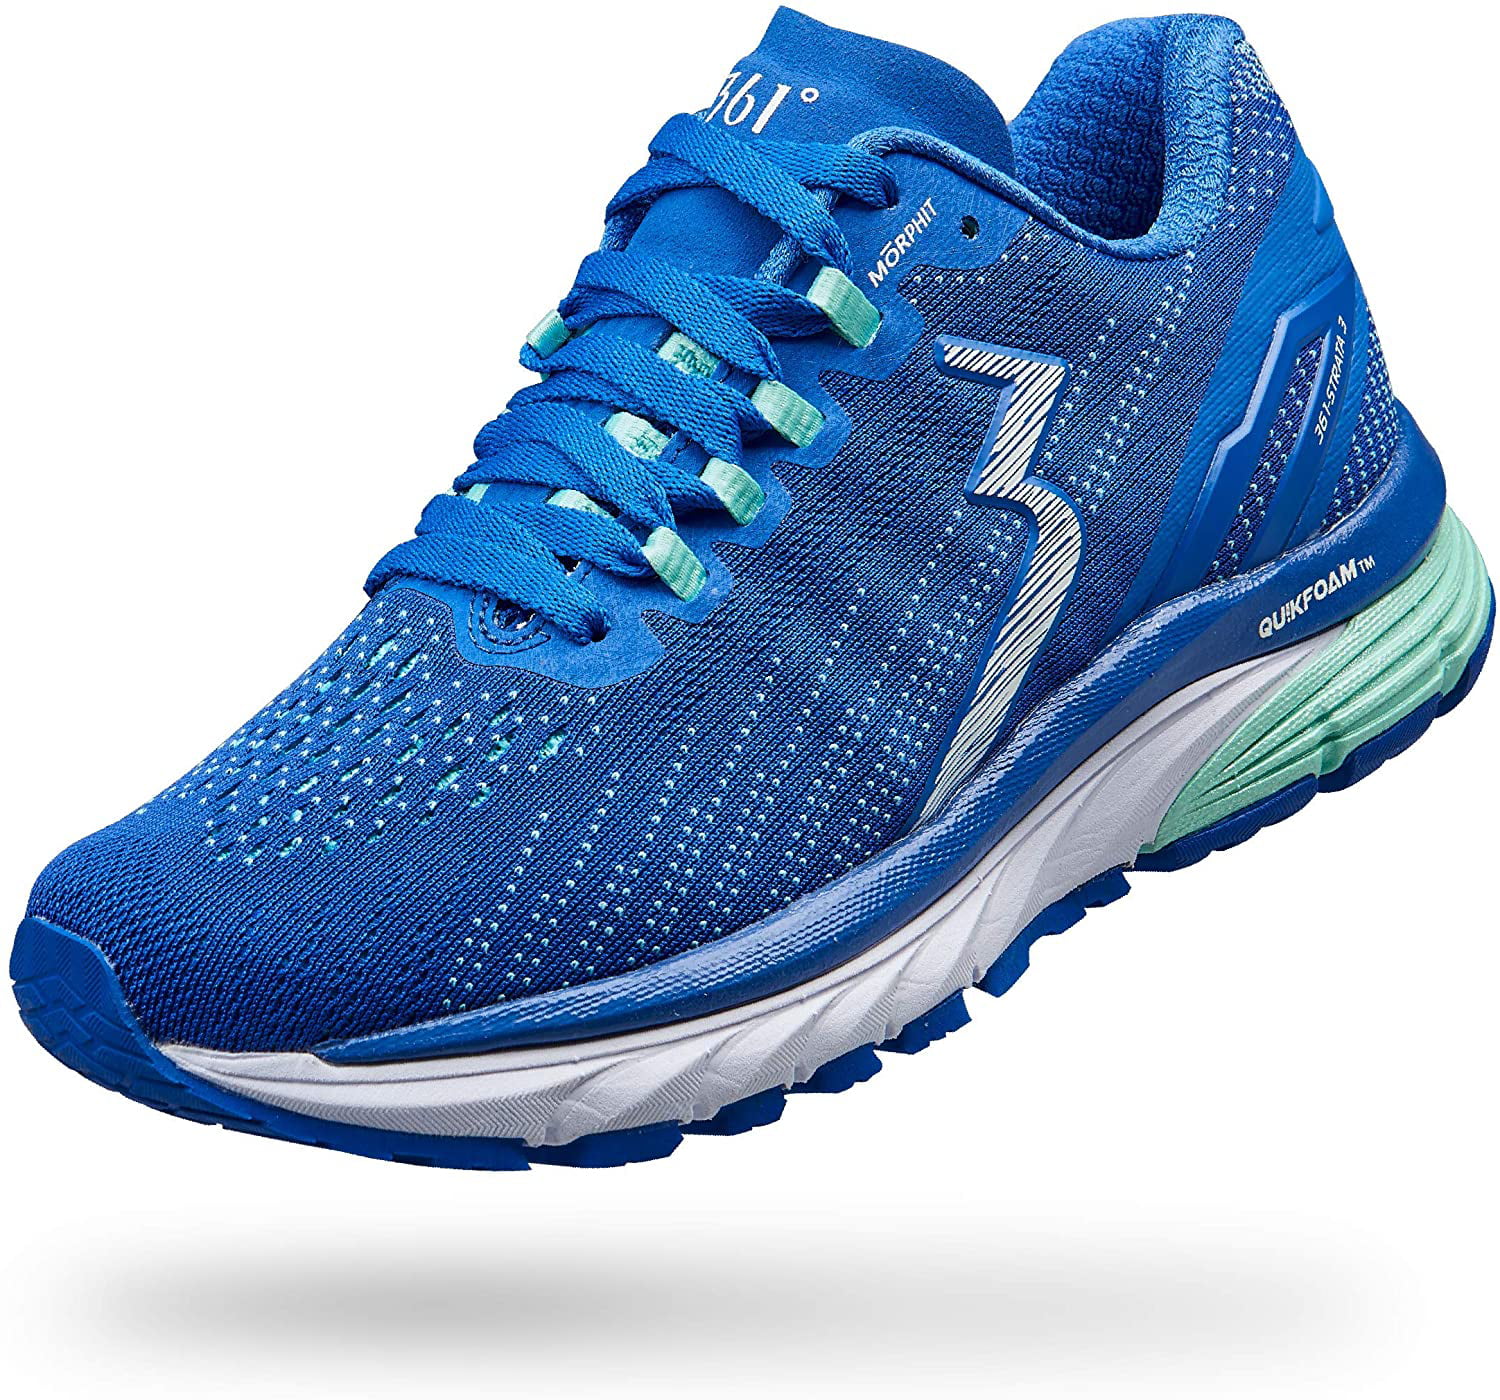 NEW Mens 361 Breeze Running Shoes Choose Size & Color! 